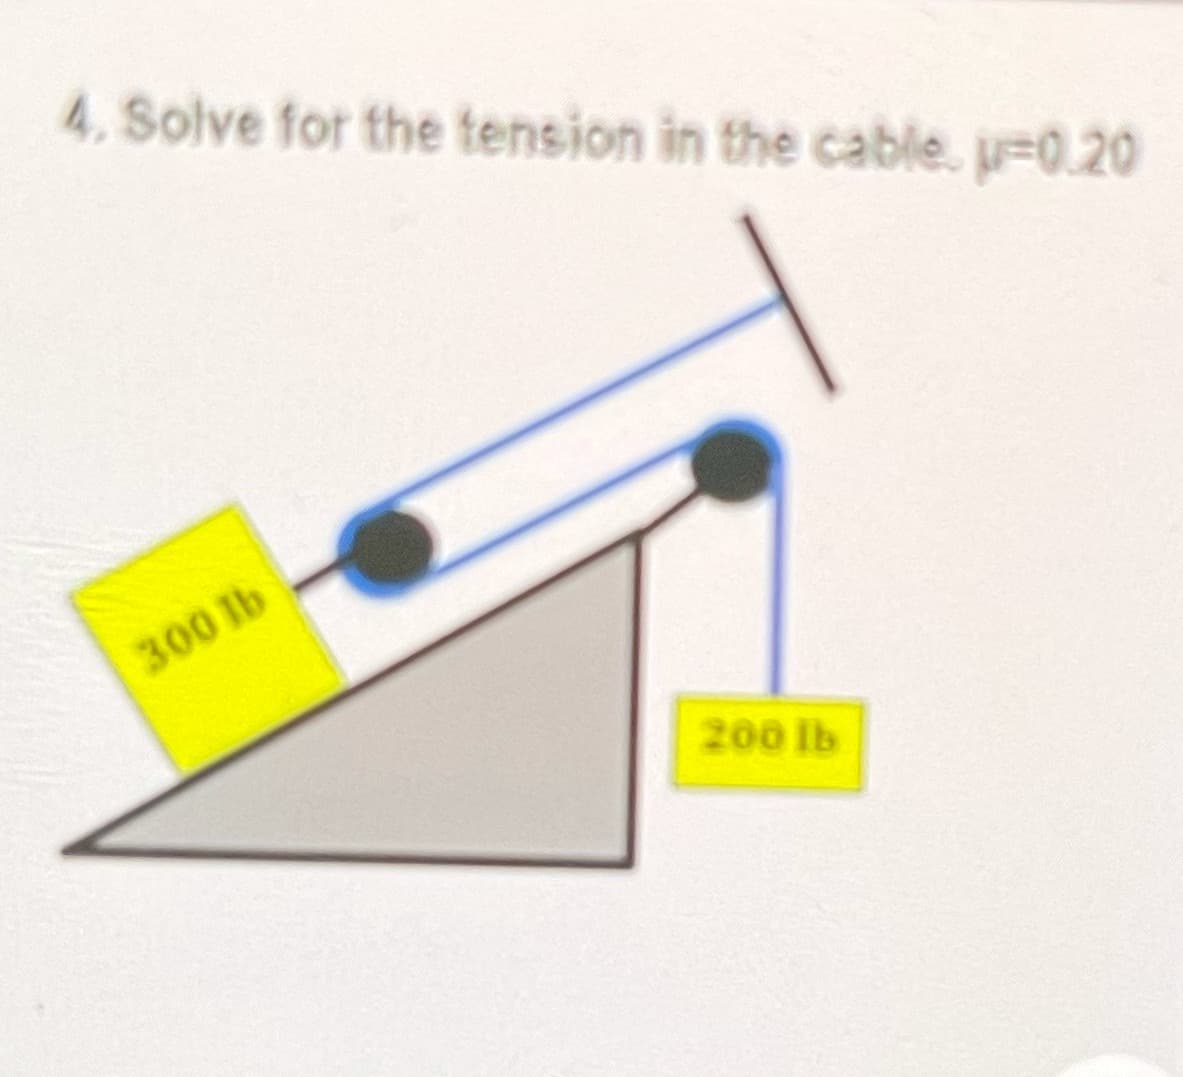 4. Solve for the tension in the cable. p=0.20
300 lb
200 Ib
